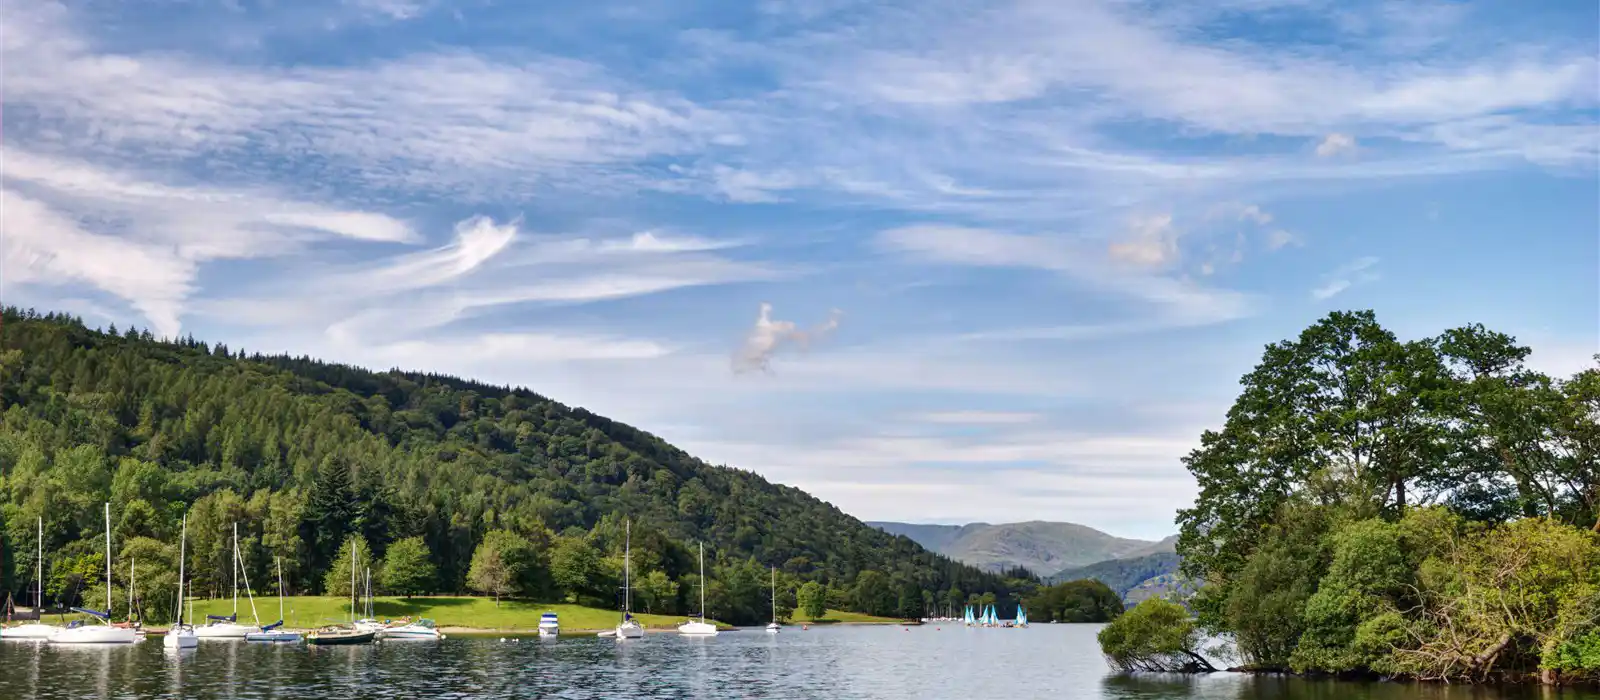 Lake Windermere: a great place to hire a boat!